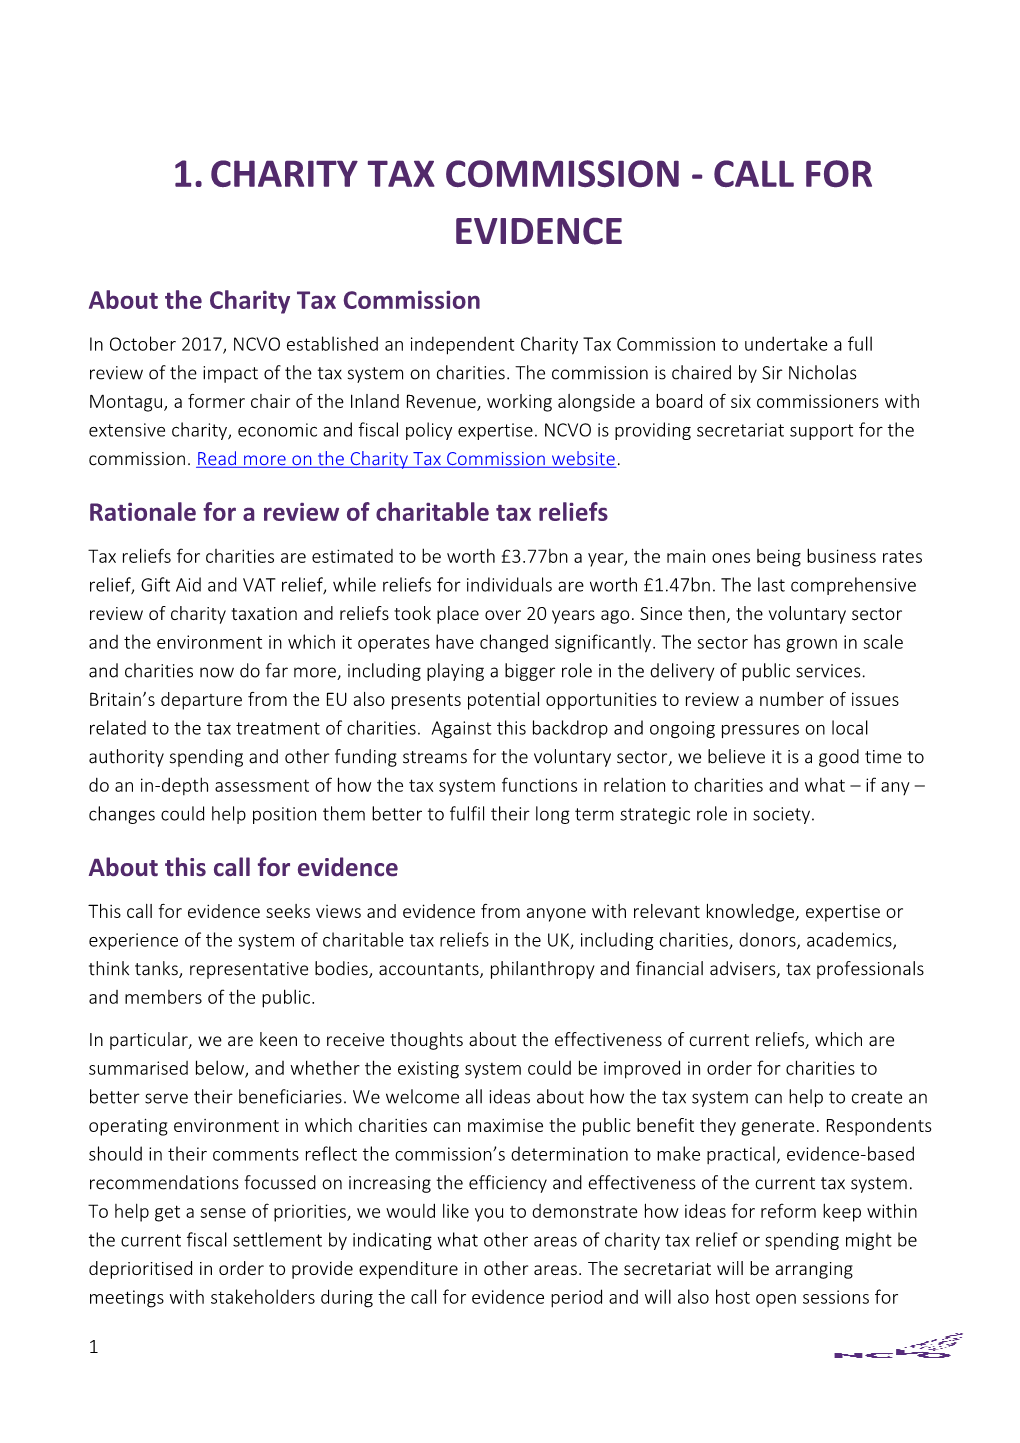 Charity Tax Commission - Call for Evidence